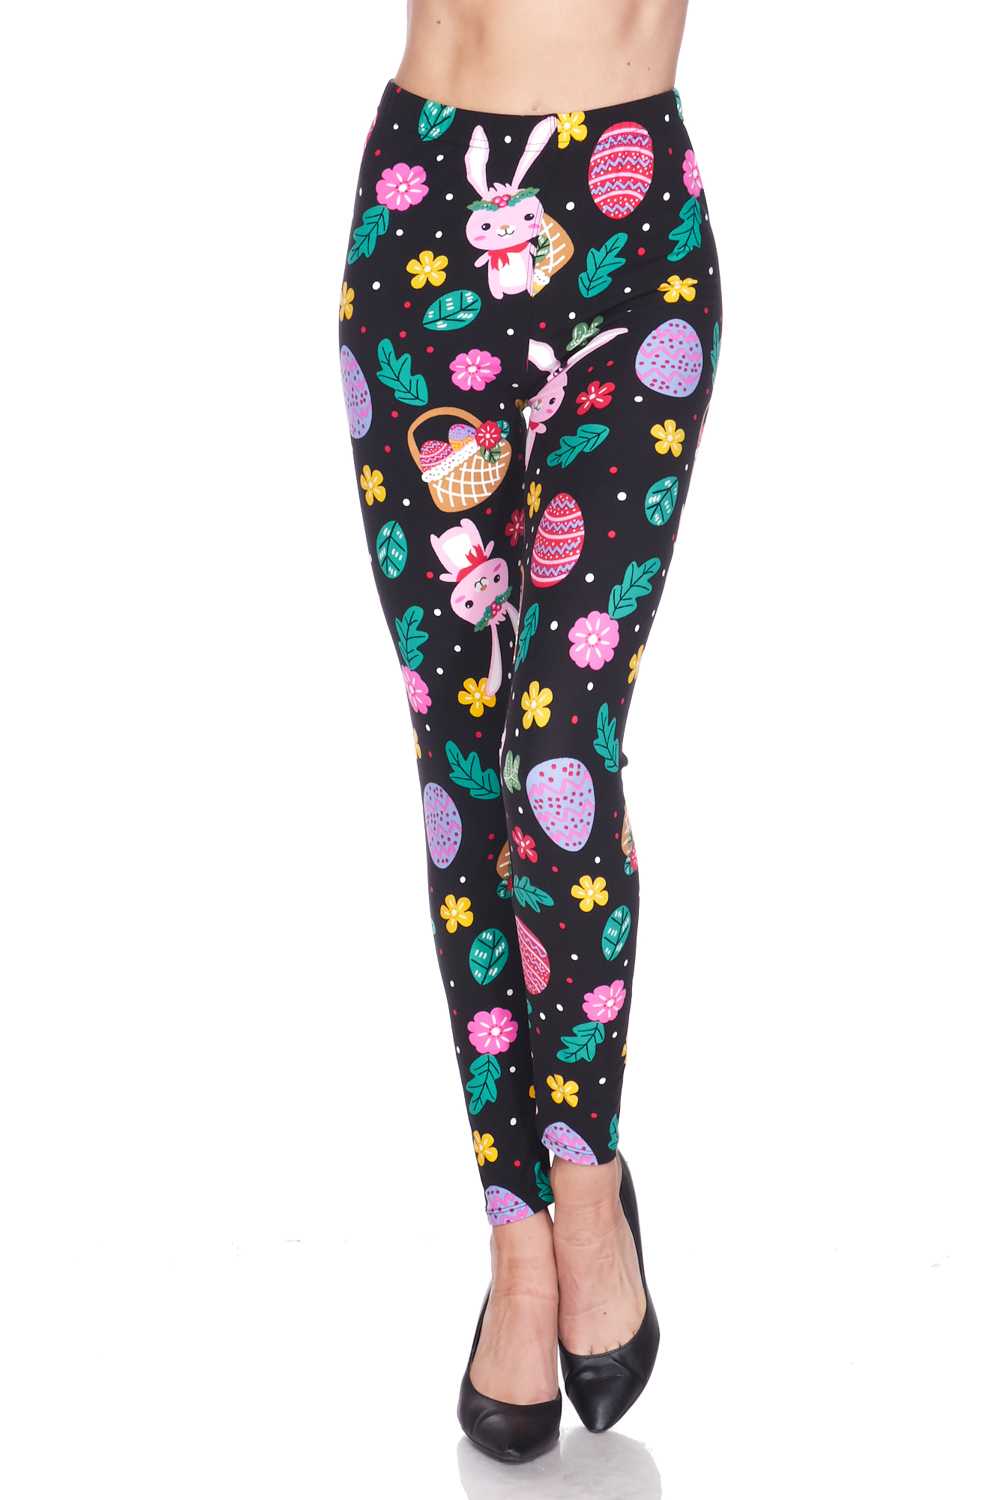 Wholesale Buttery Smooth Cute Bunnies and Easter Egg Extra Plus Size Leggings - 3X-5X